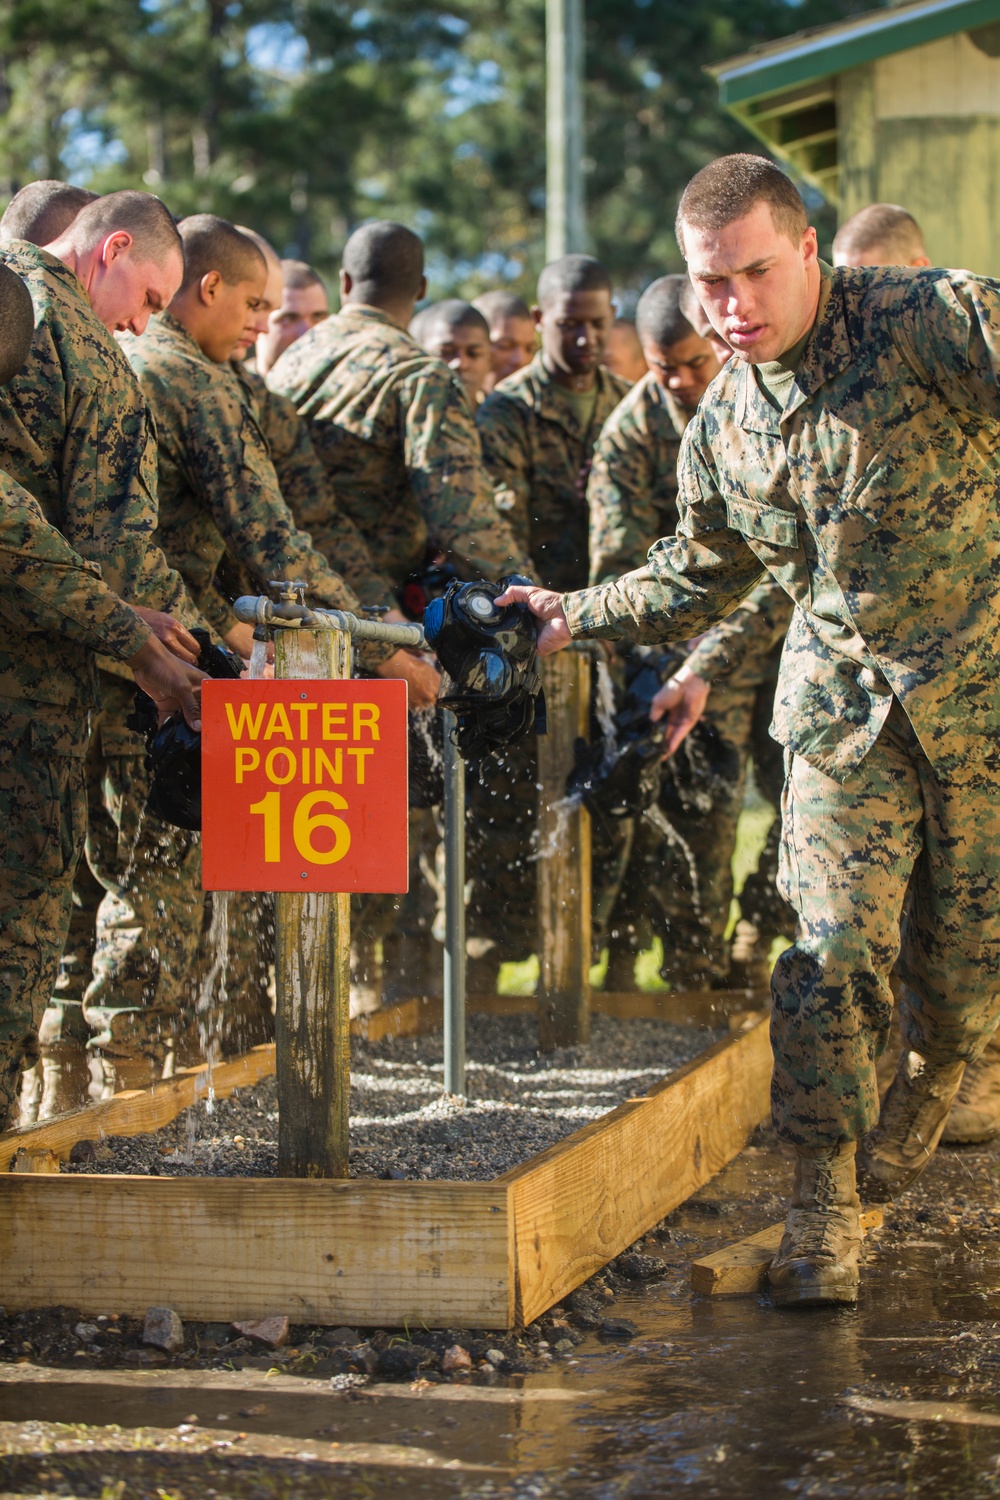 Photo Gallery: Marine recruits brave gas chamber on Parris Island